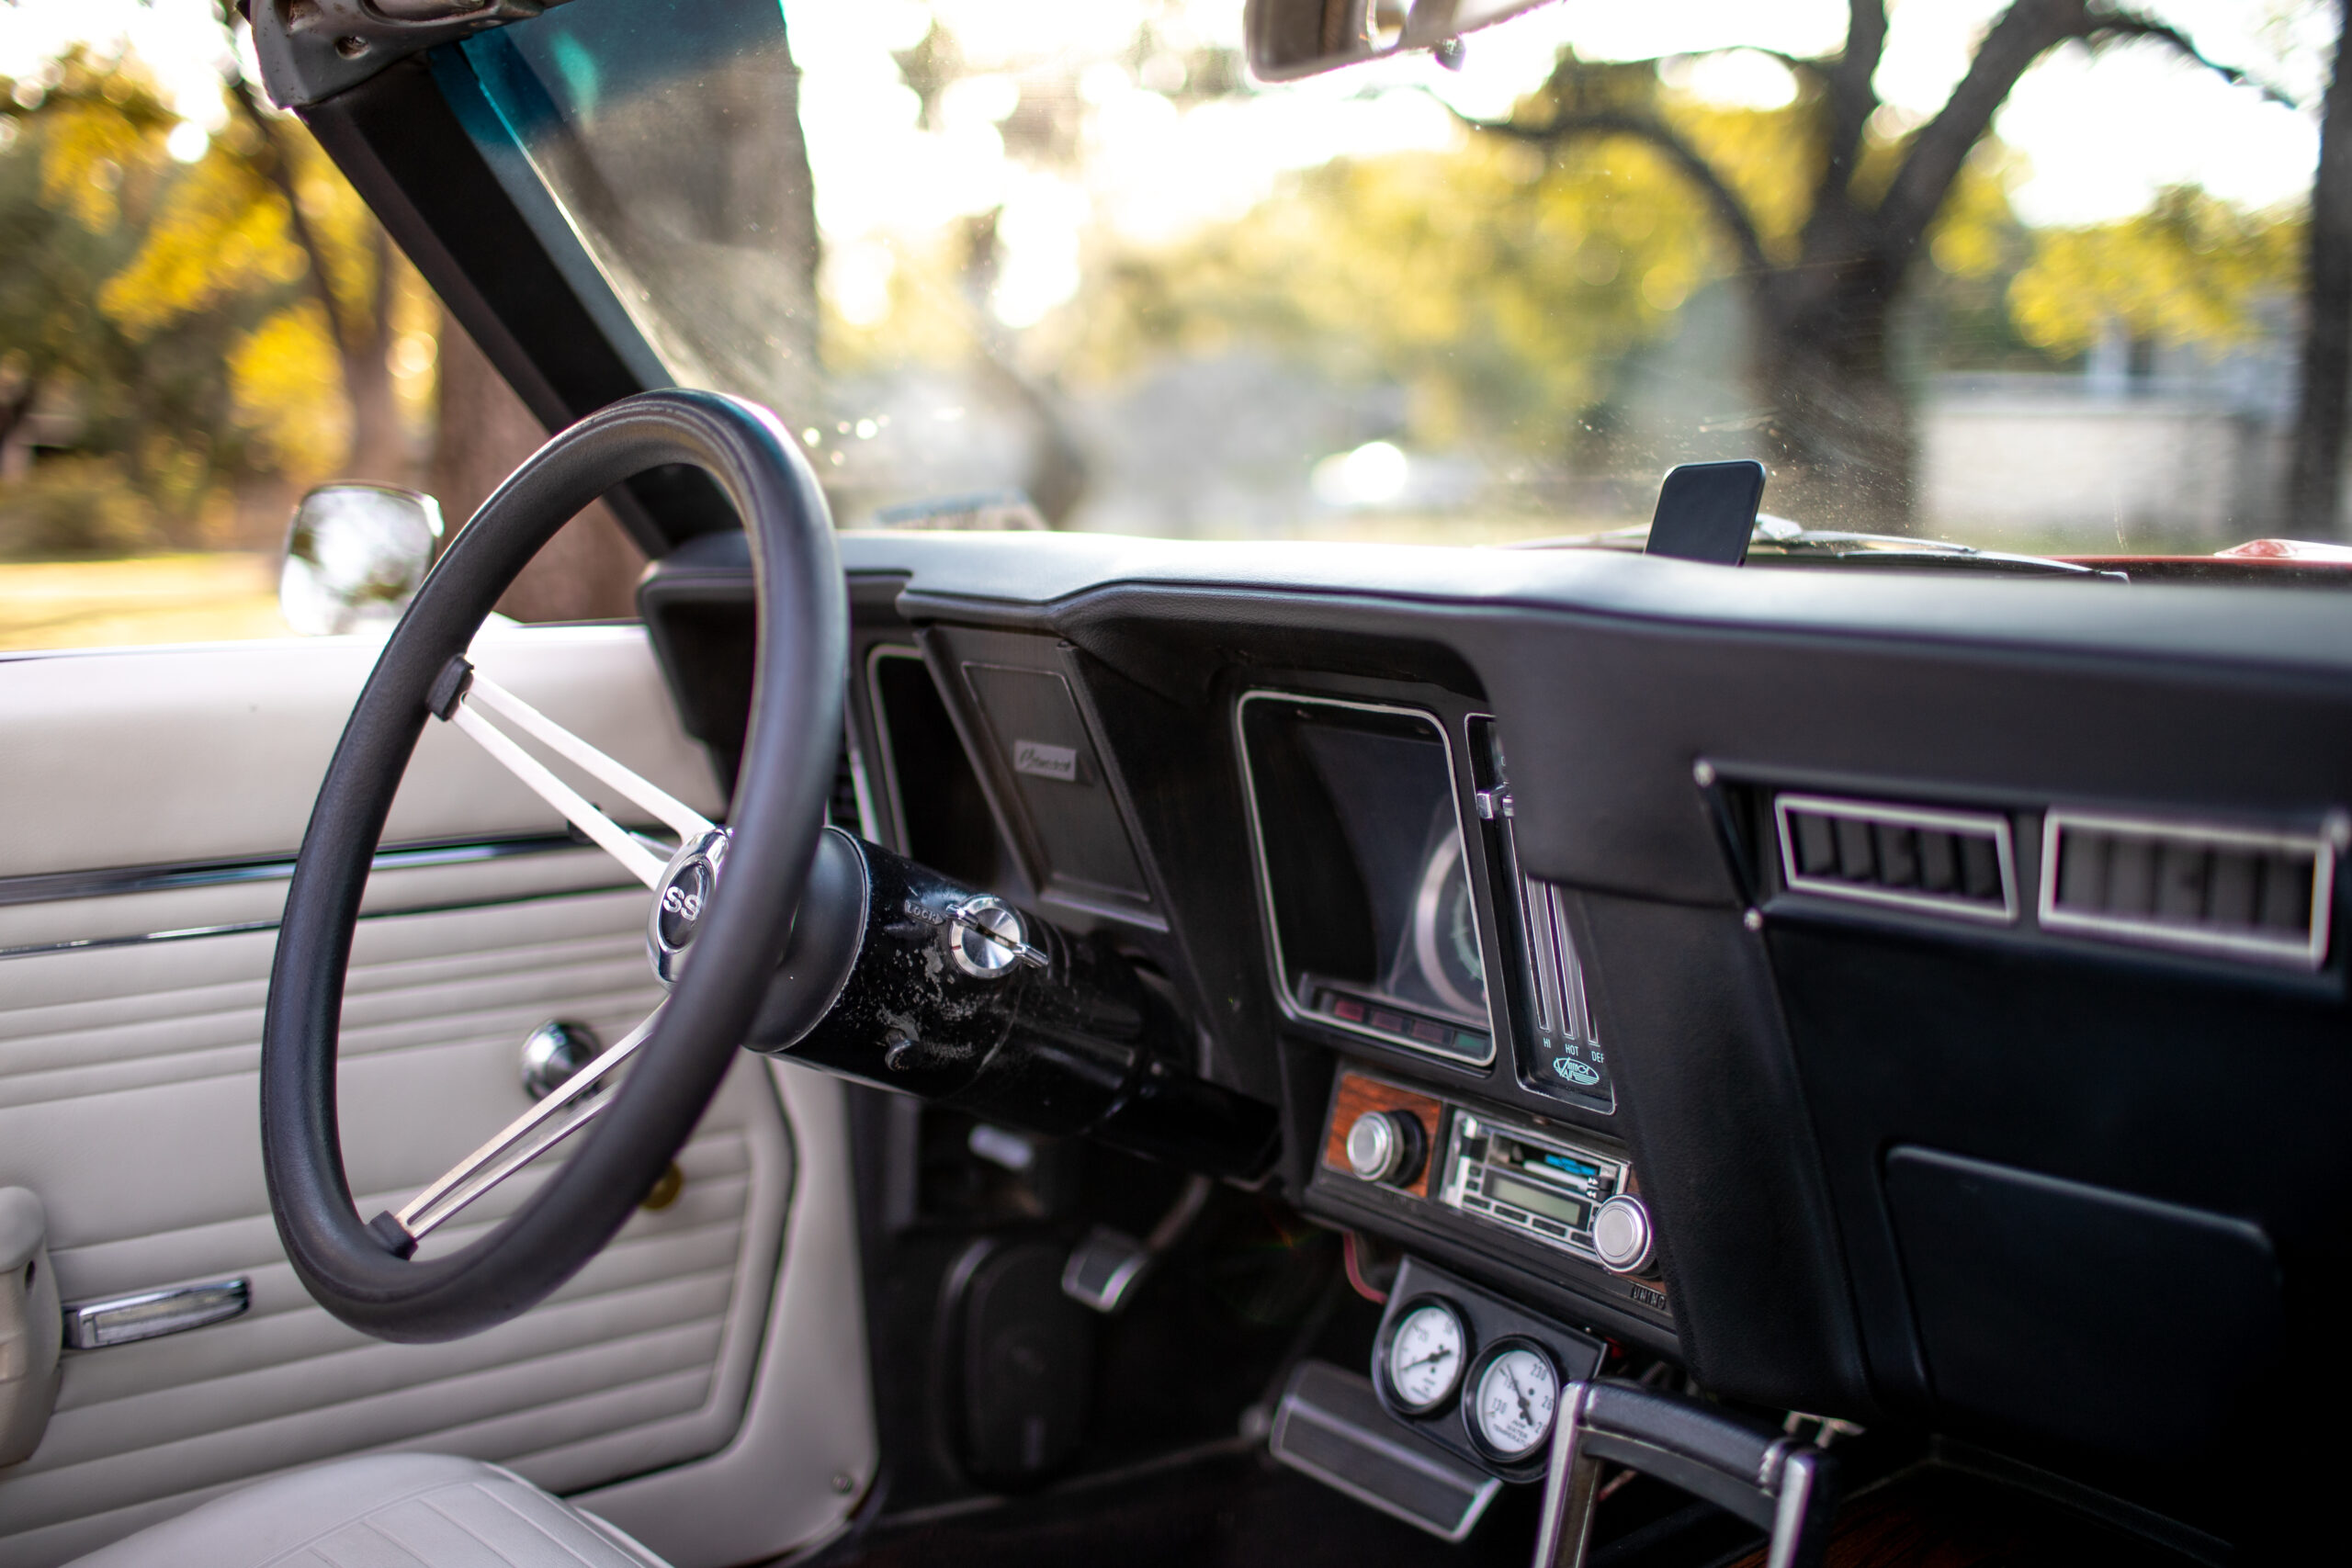 Interior view of a classic car focusing on the steering wheel, dashboard, and vintage radio controls with outdoor scenery visible through the windows.